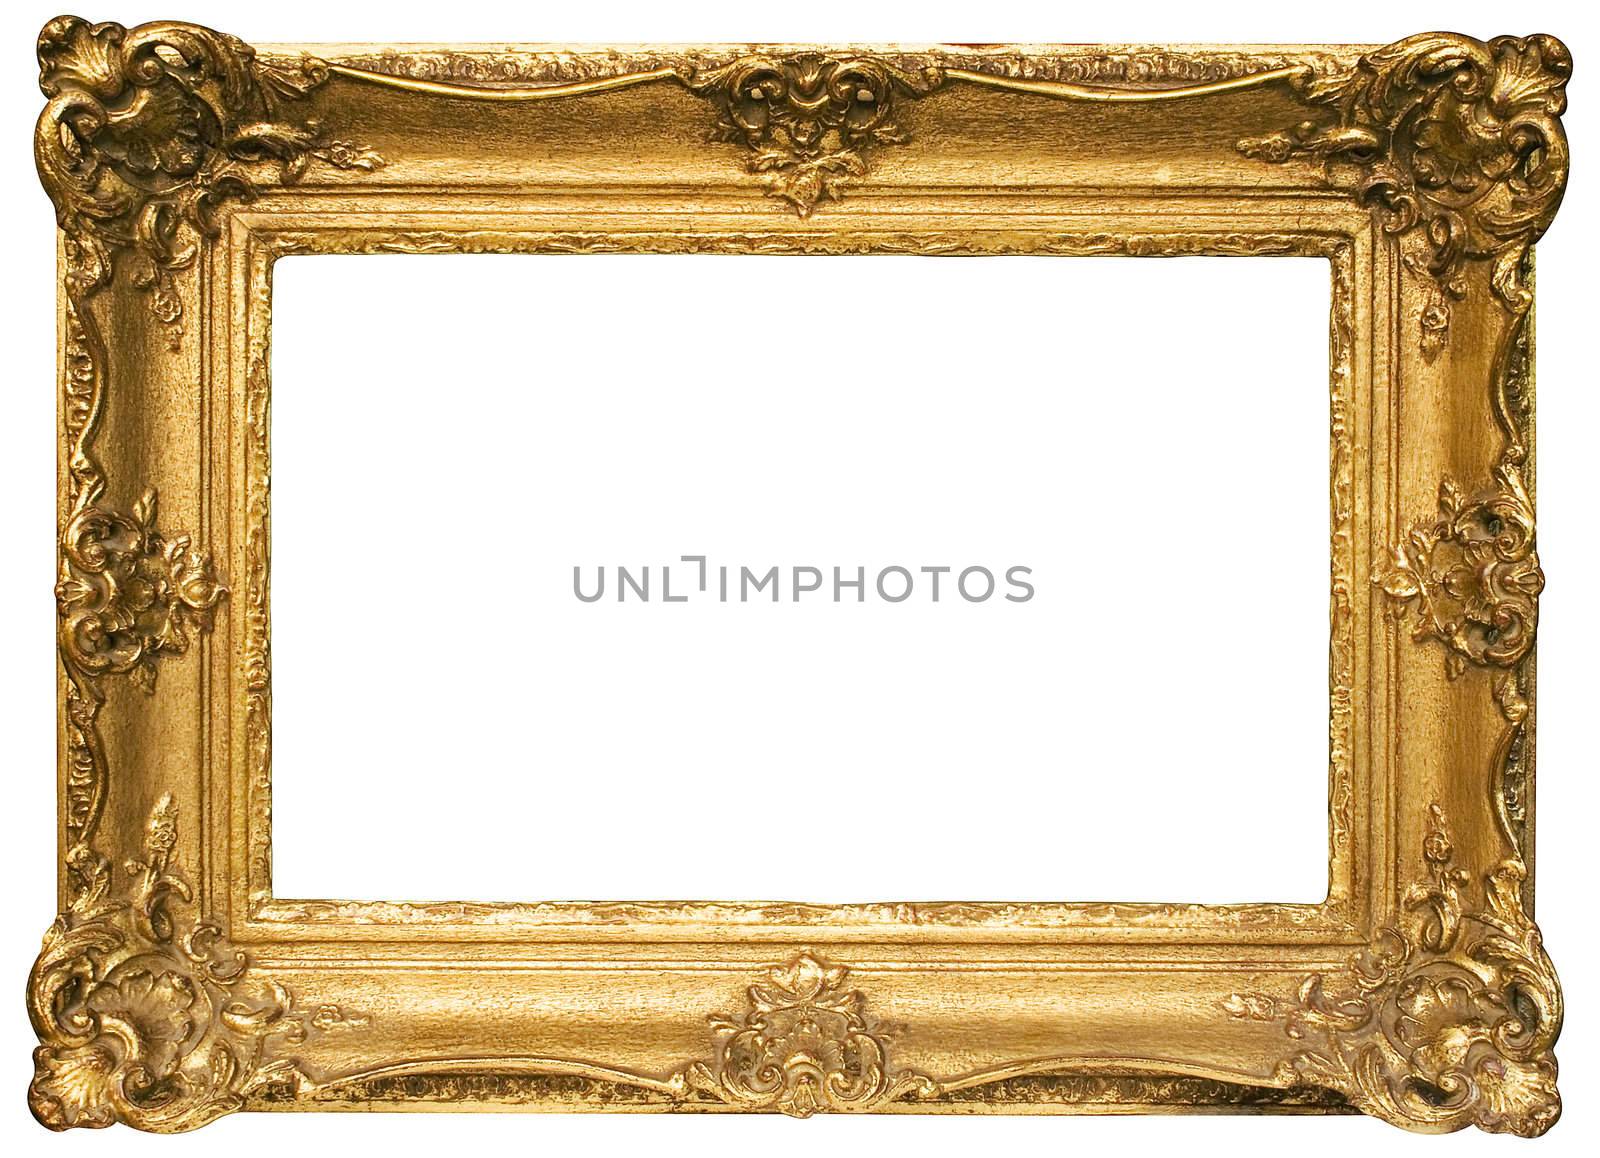 Antique golden picture frame isolated on a white background. File contains clipping path.